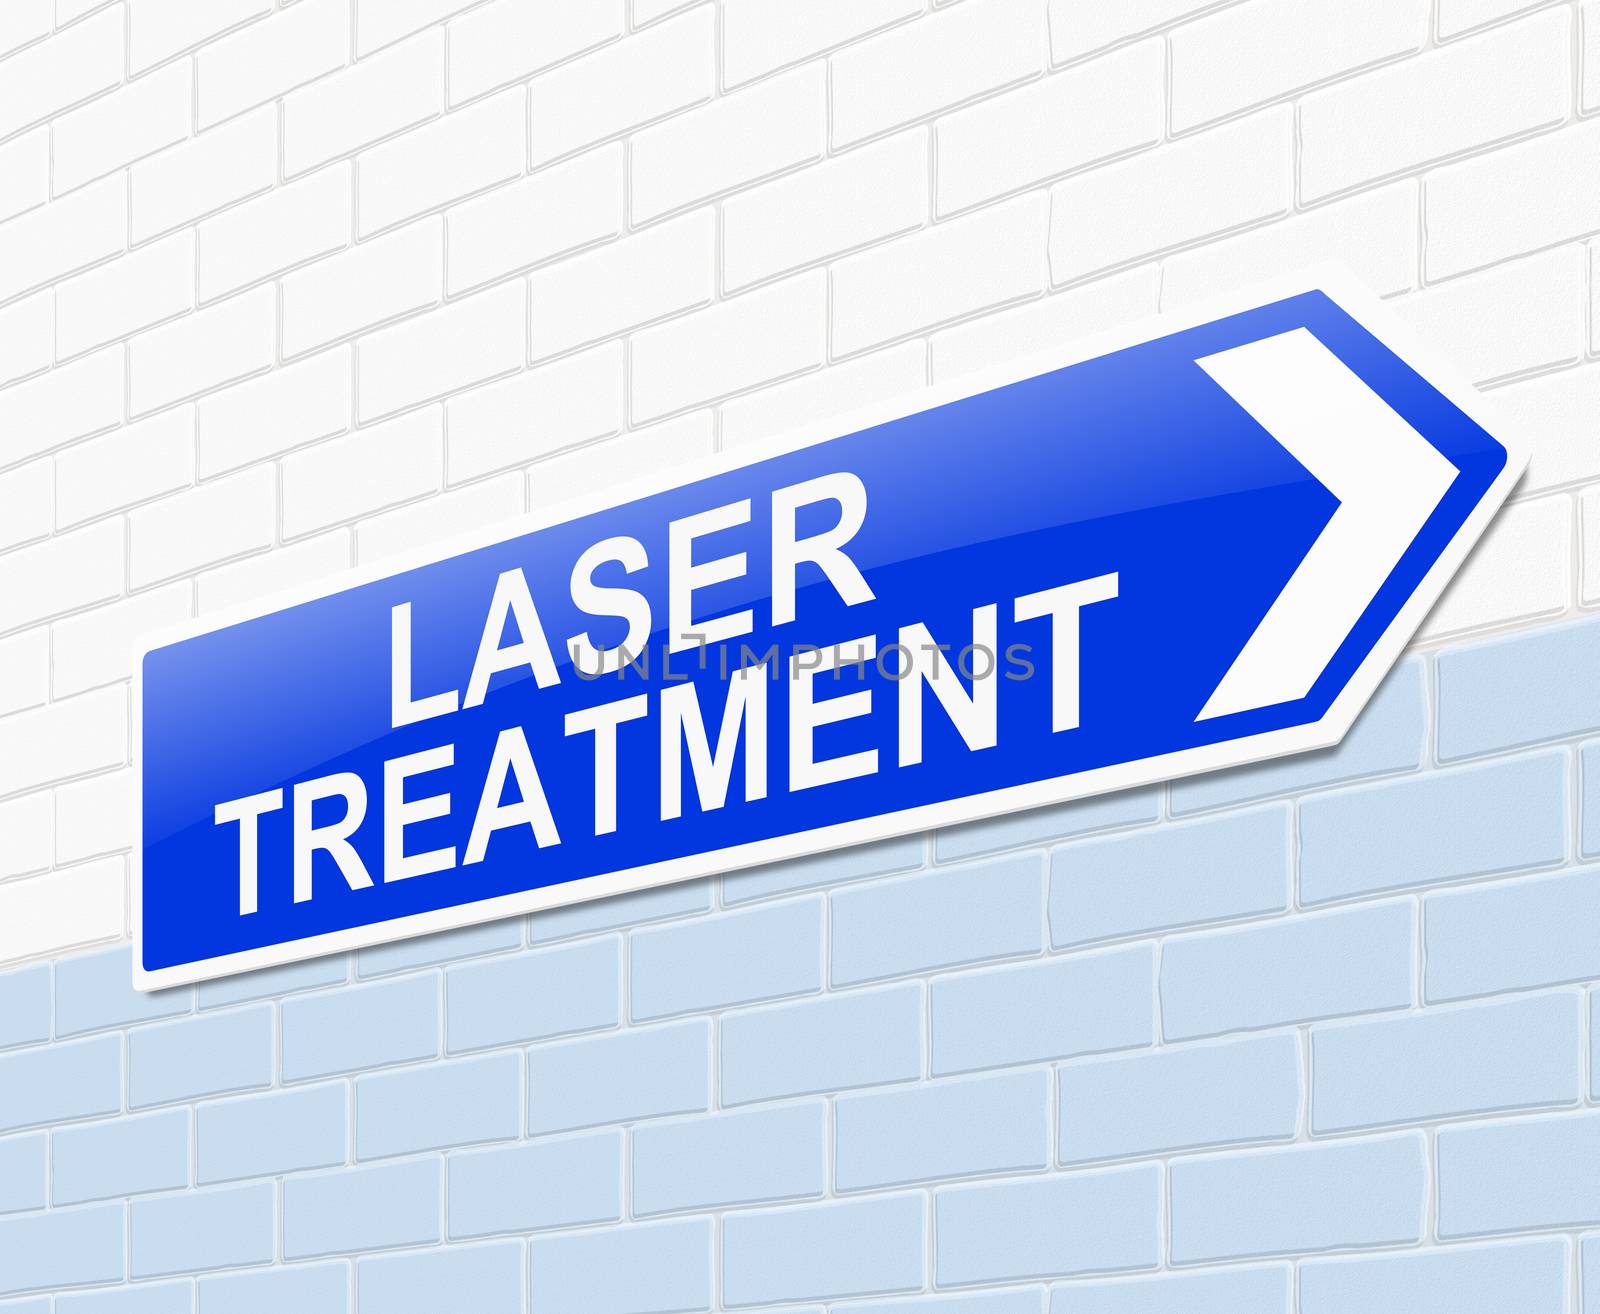 Illustration depicting a sign with a laser treatment concept.